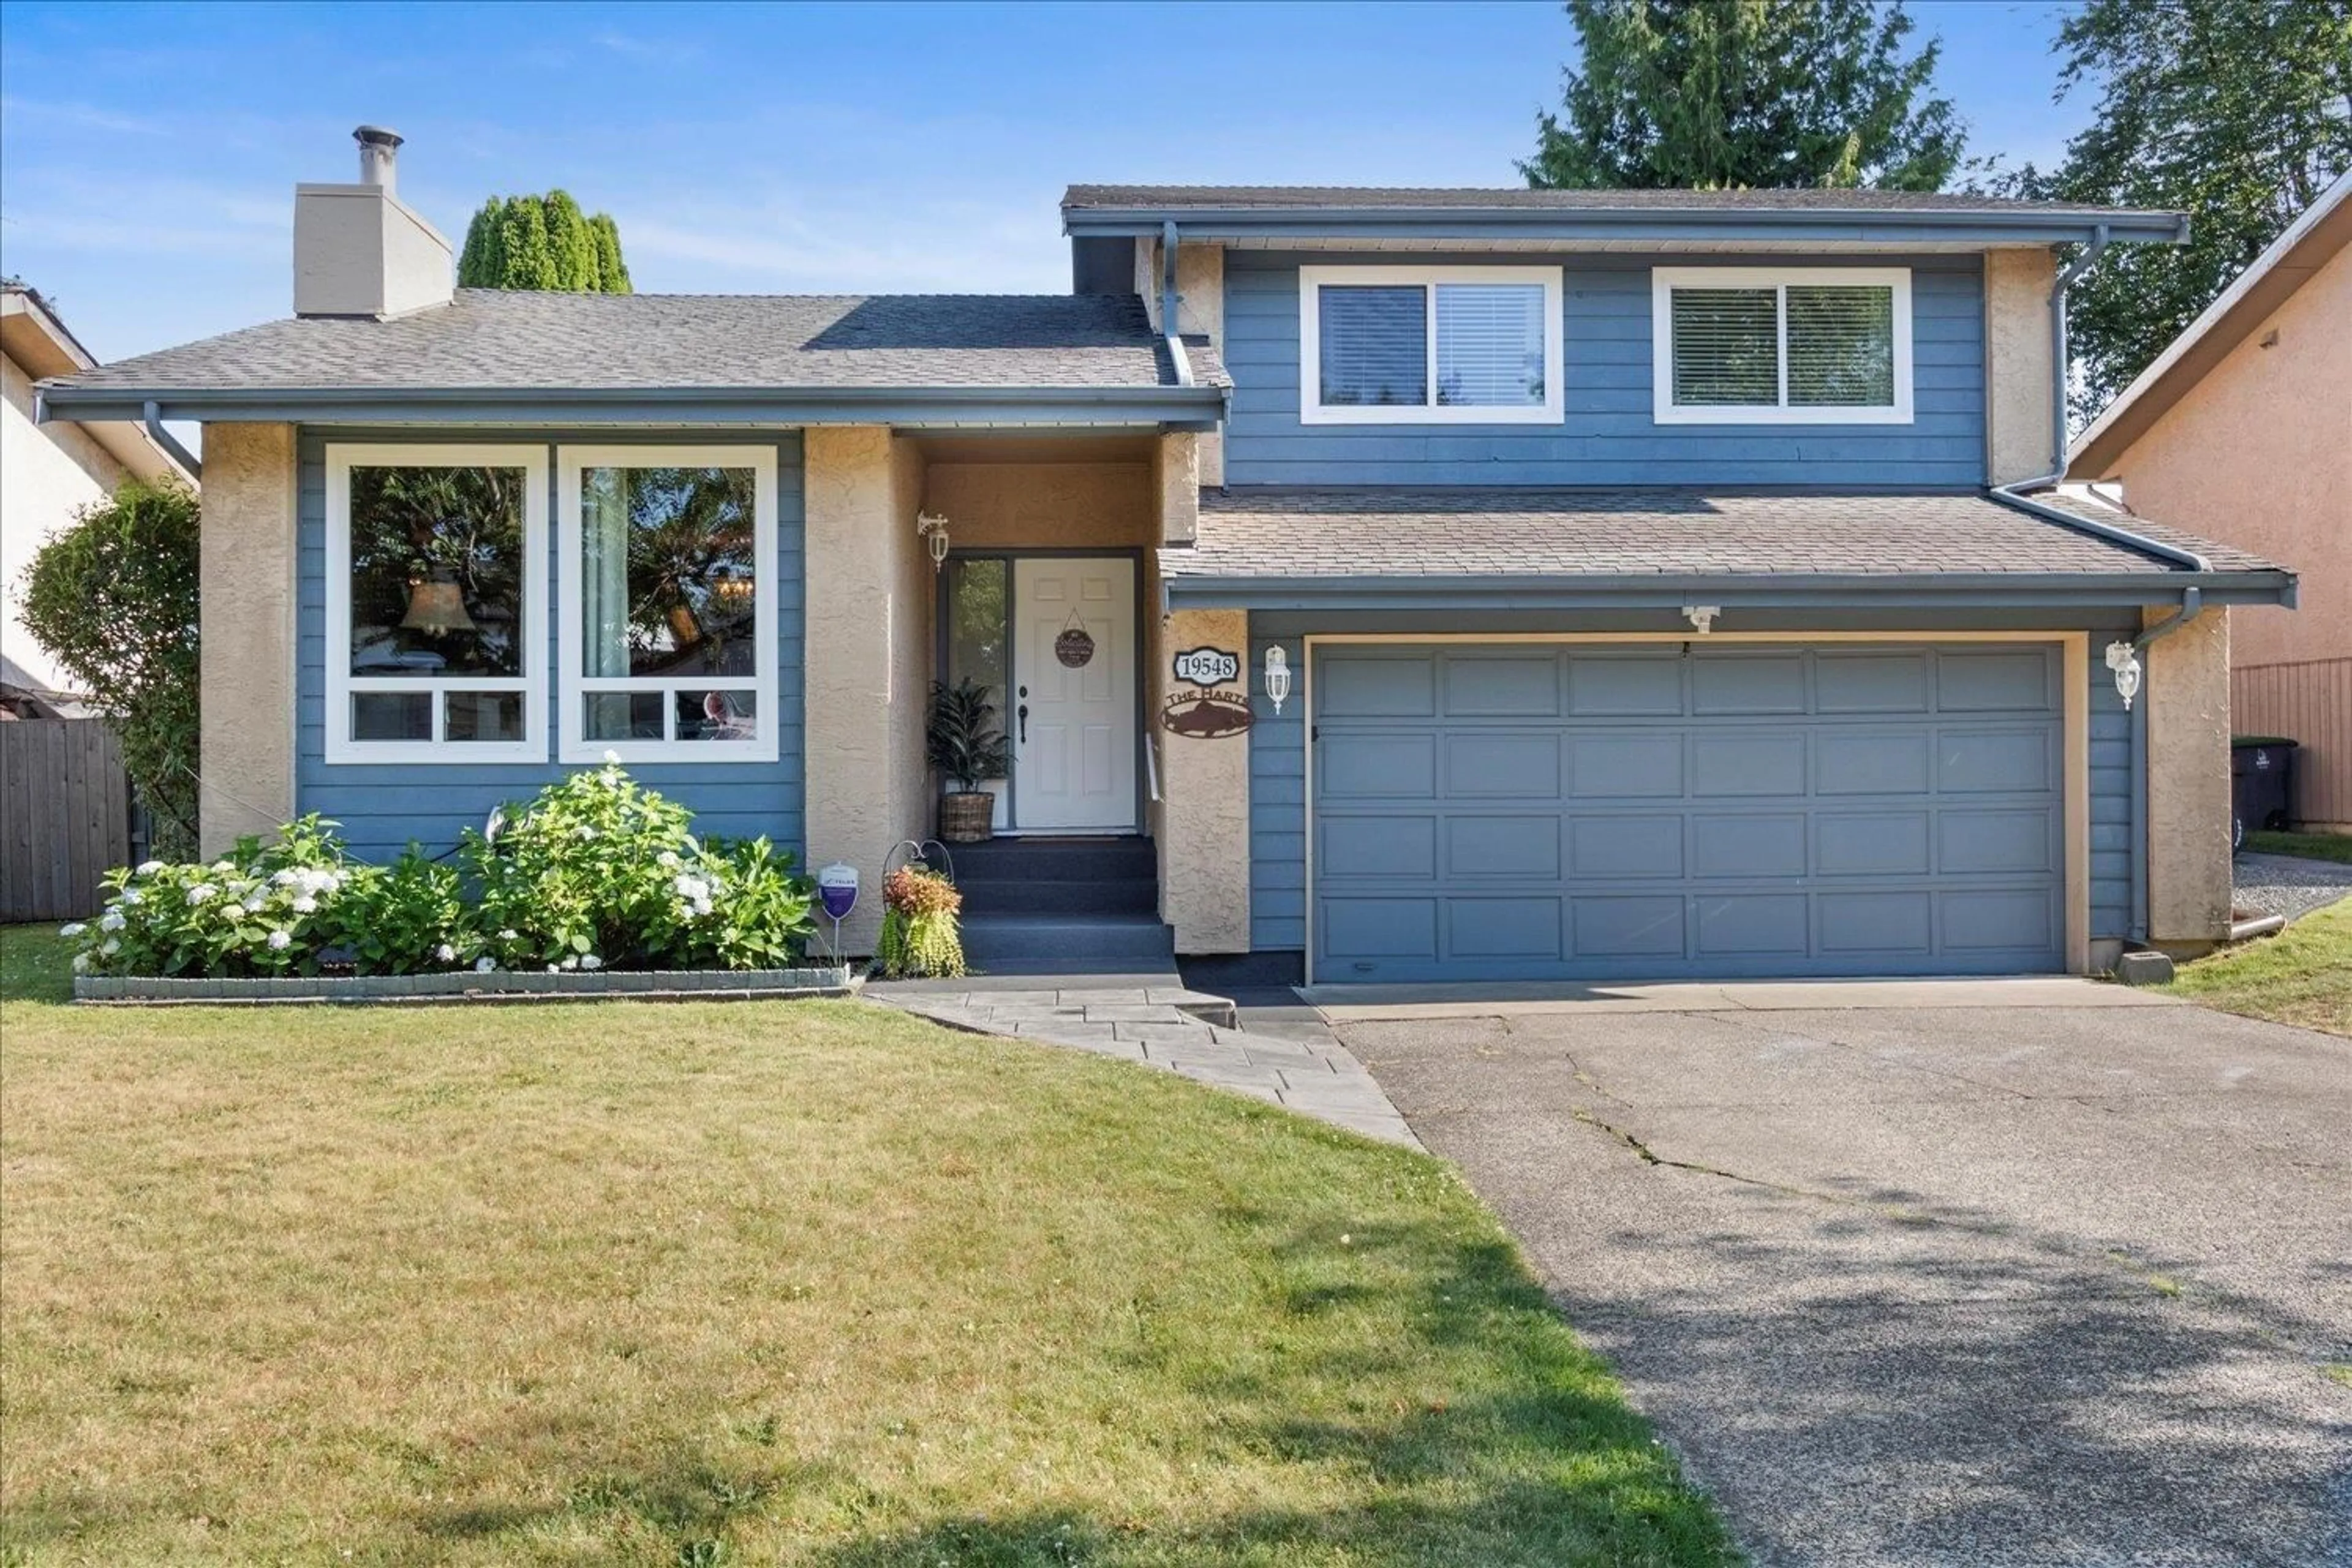 Home with vinyl exterior material for 19548 62A AVENUE, Surrey British Columbia V3S7L9